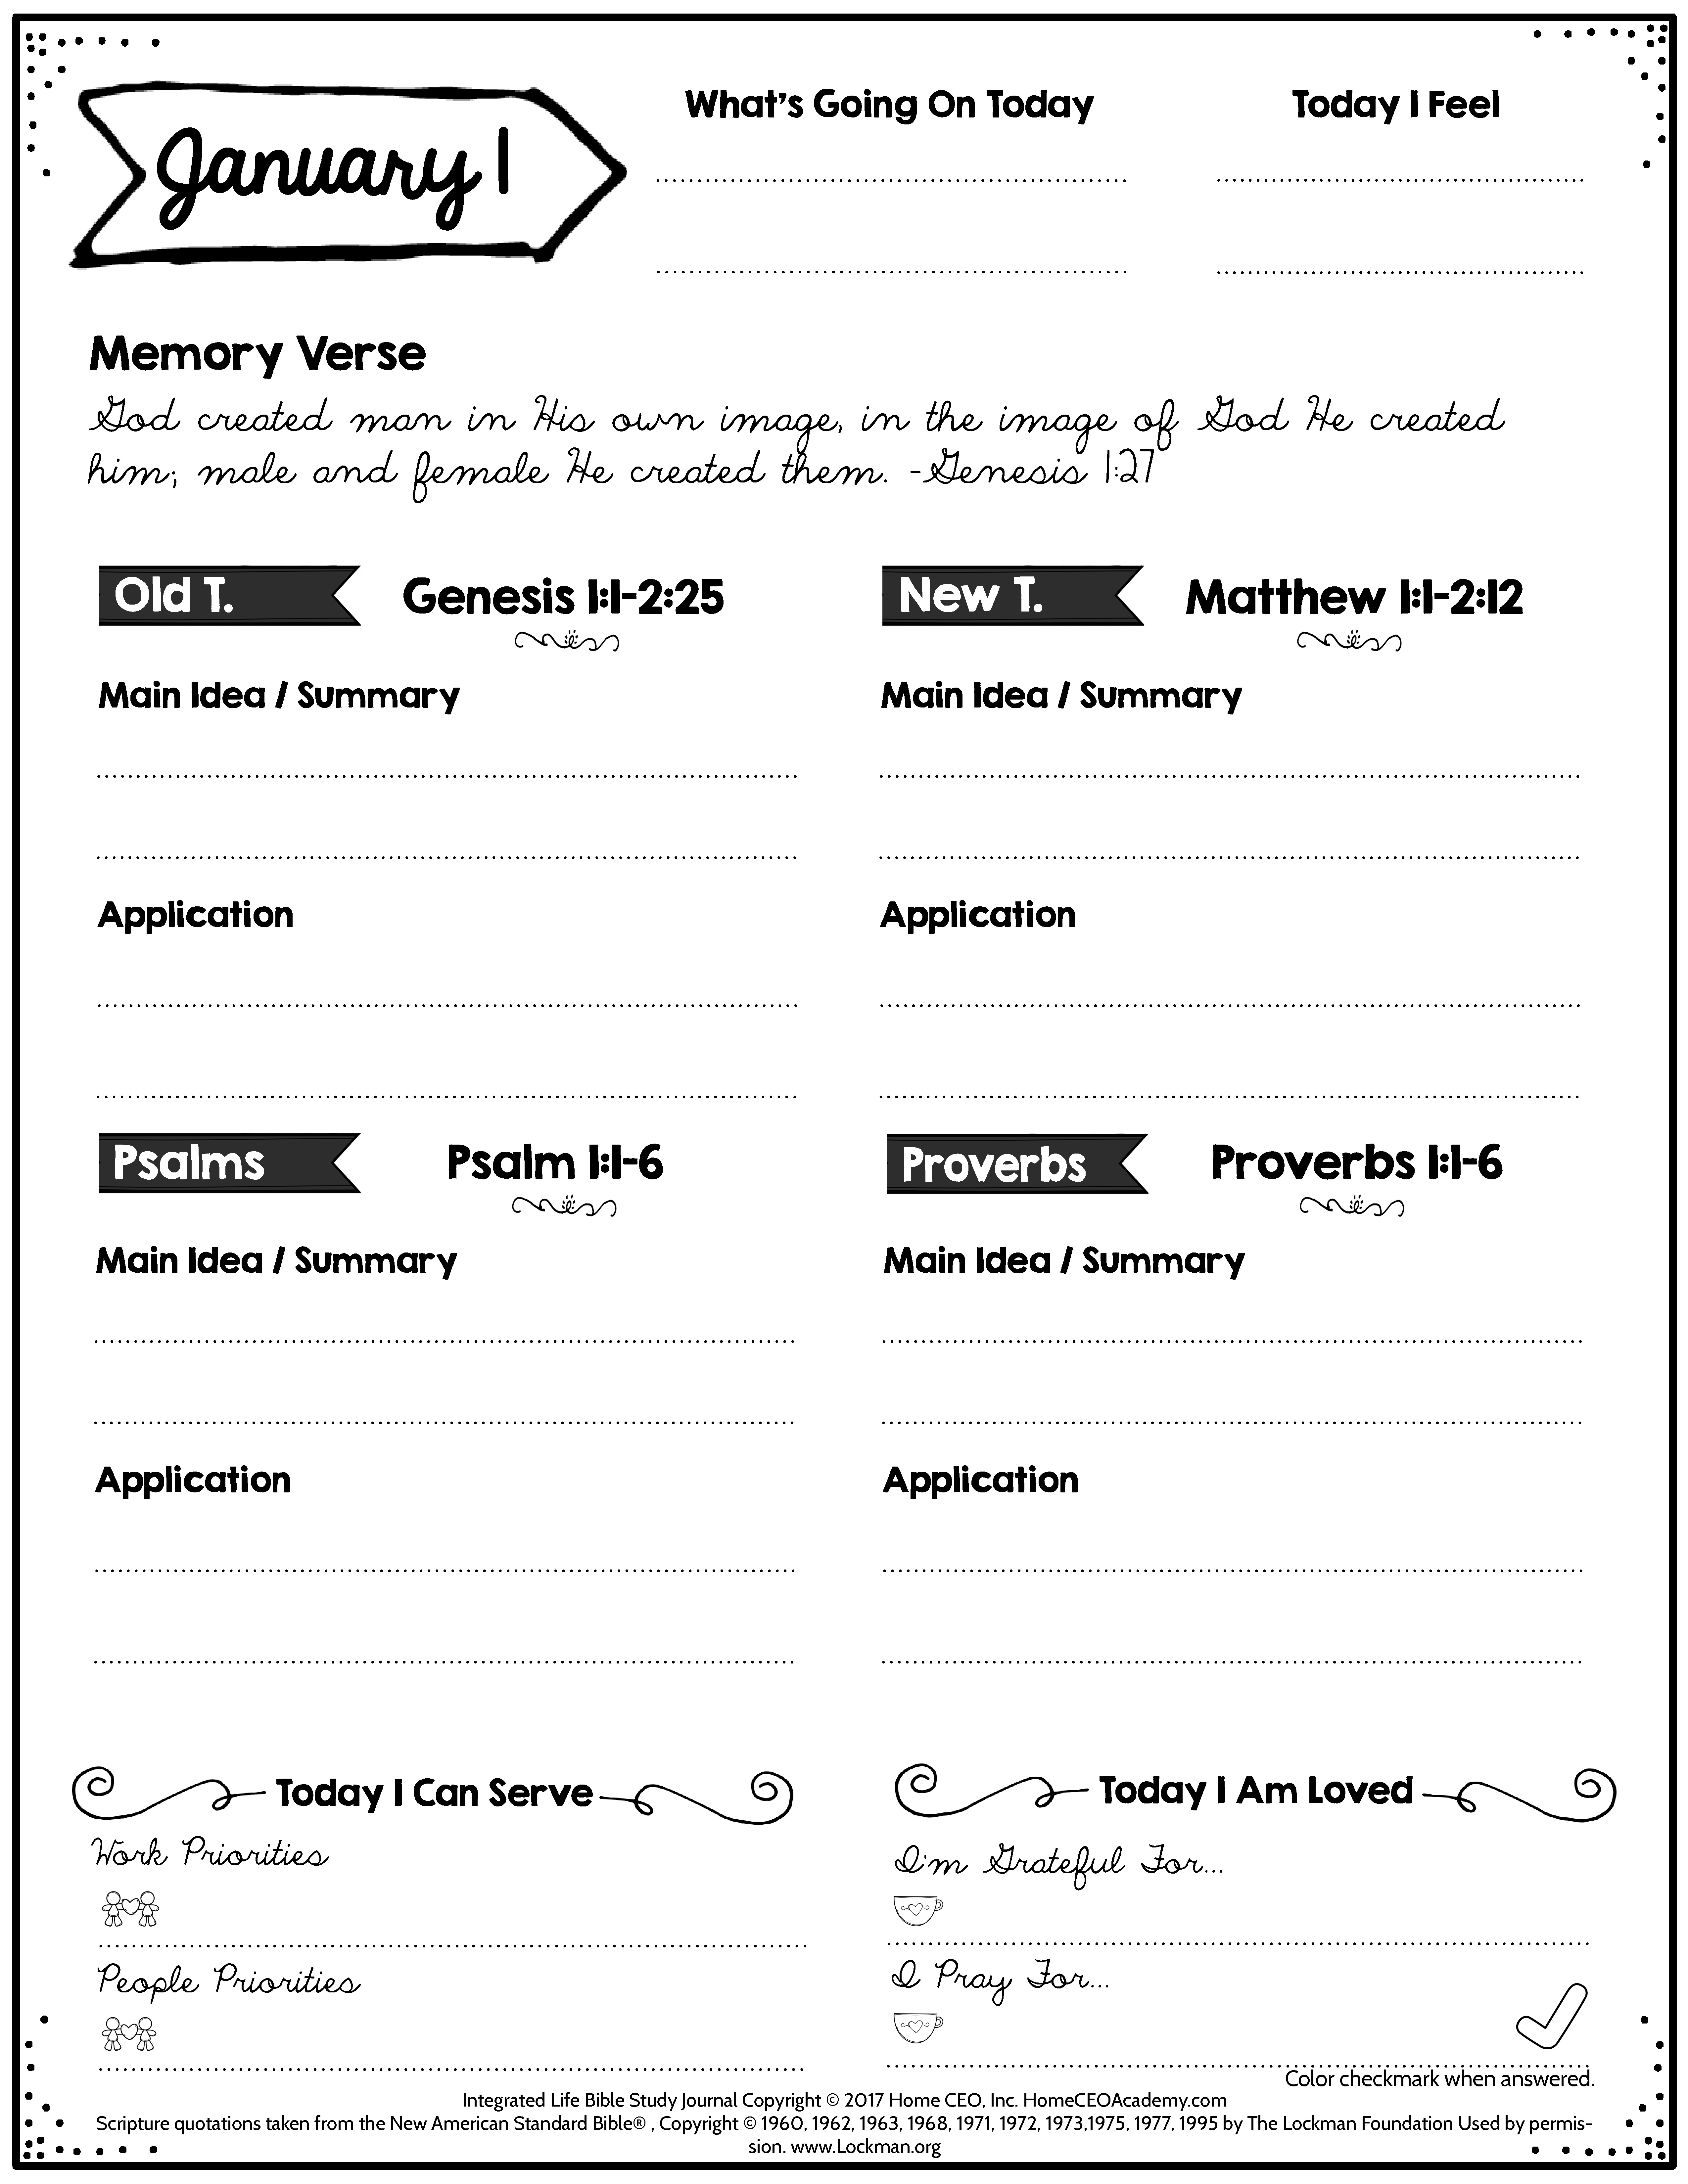 Free Printable Bible Study Worksheets (82+ Images In ...